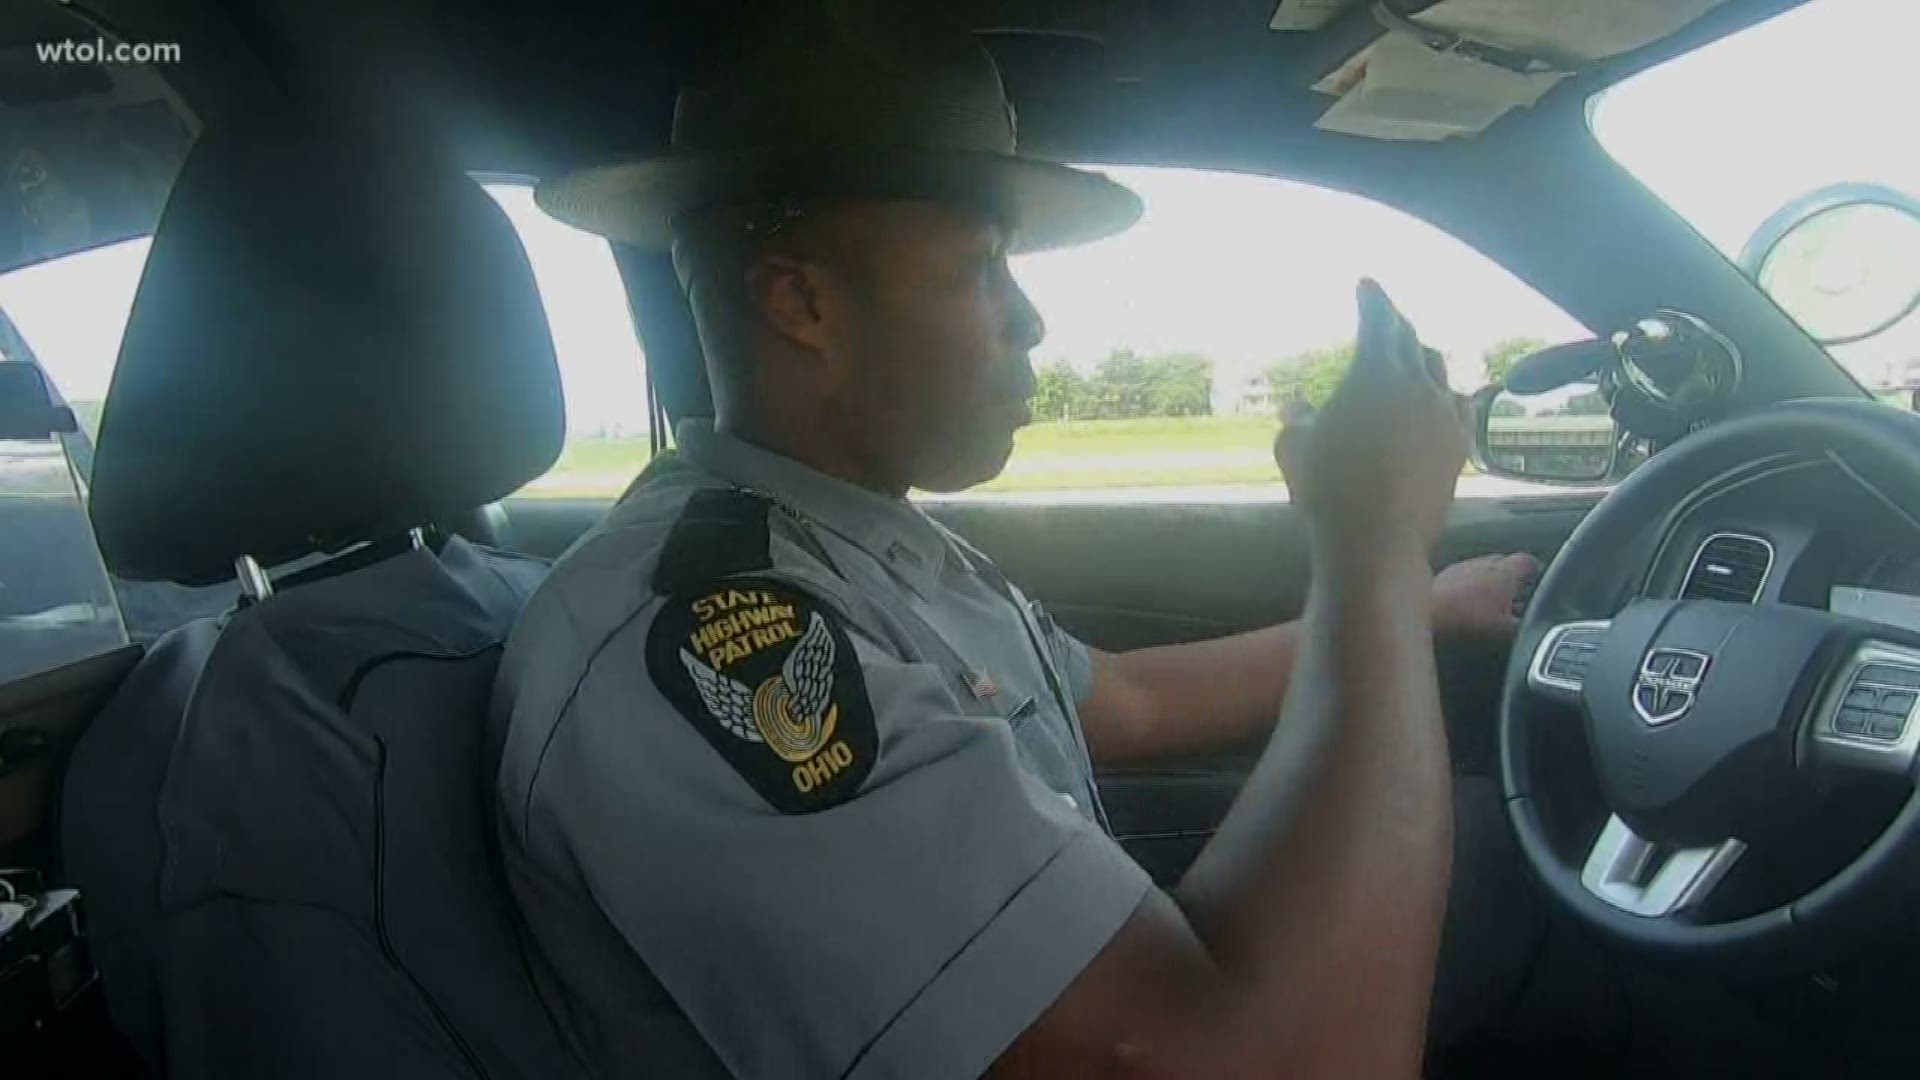 Troopers say to slow down, move over if law enforcement has made a stop and in construction zones, and don't forget your seat belts. Plus, put down that cell phone and stay safe this Labor Day weekend.